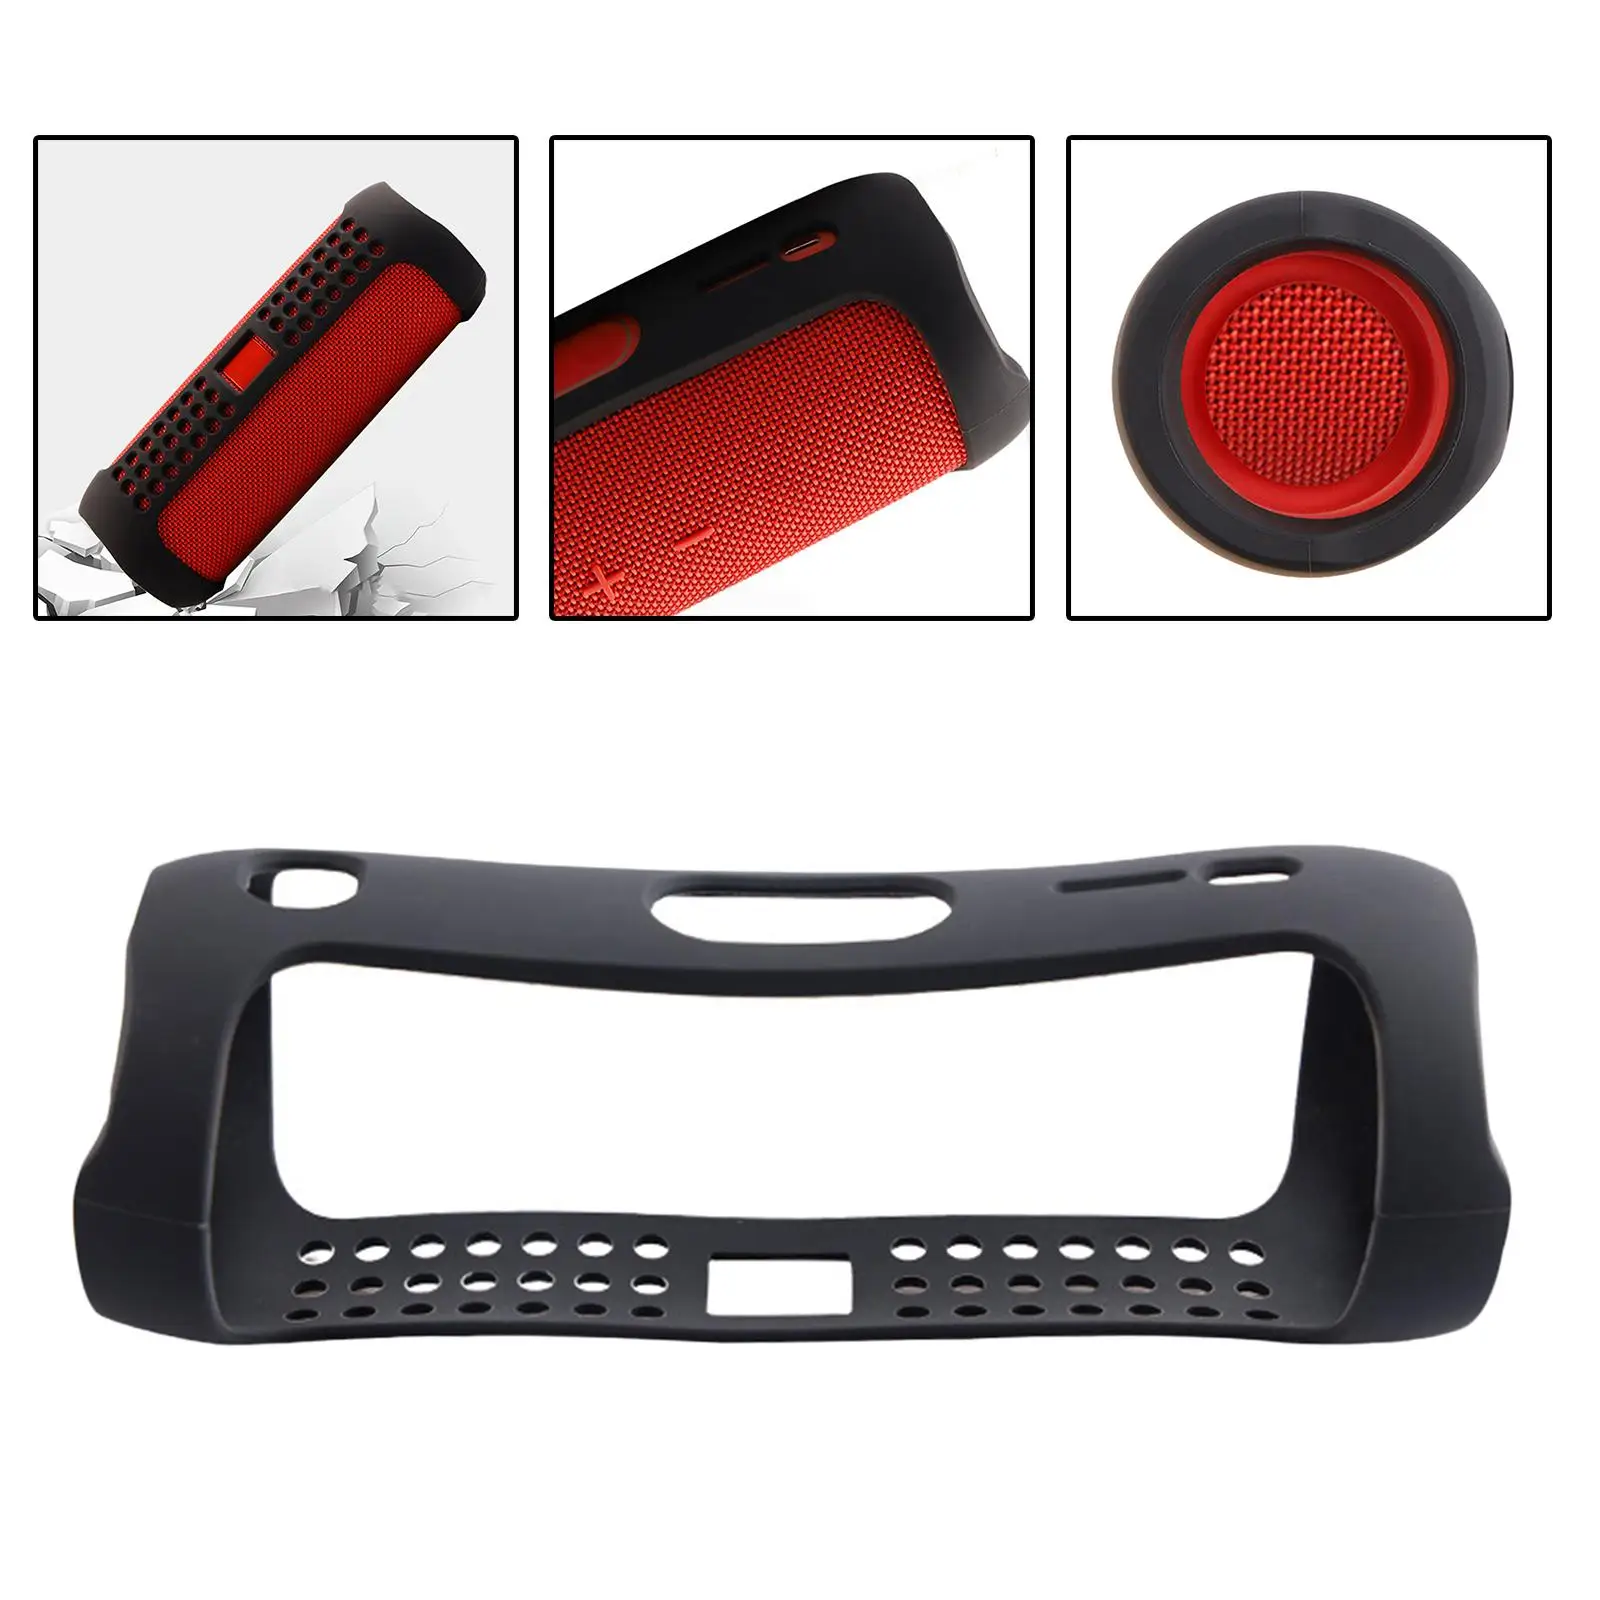 Silicone Speaker Cases Cover Portable Soft Protective Case for J-B-L Flip 5 Wireless Bluetooth Speaker